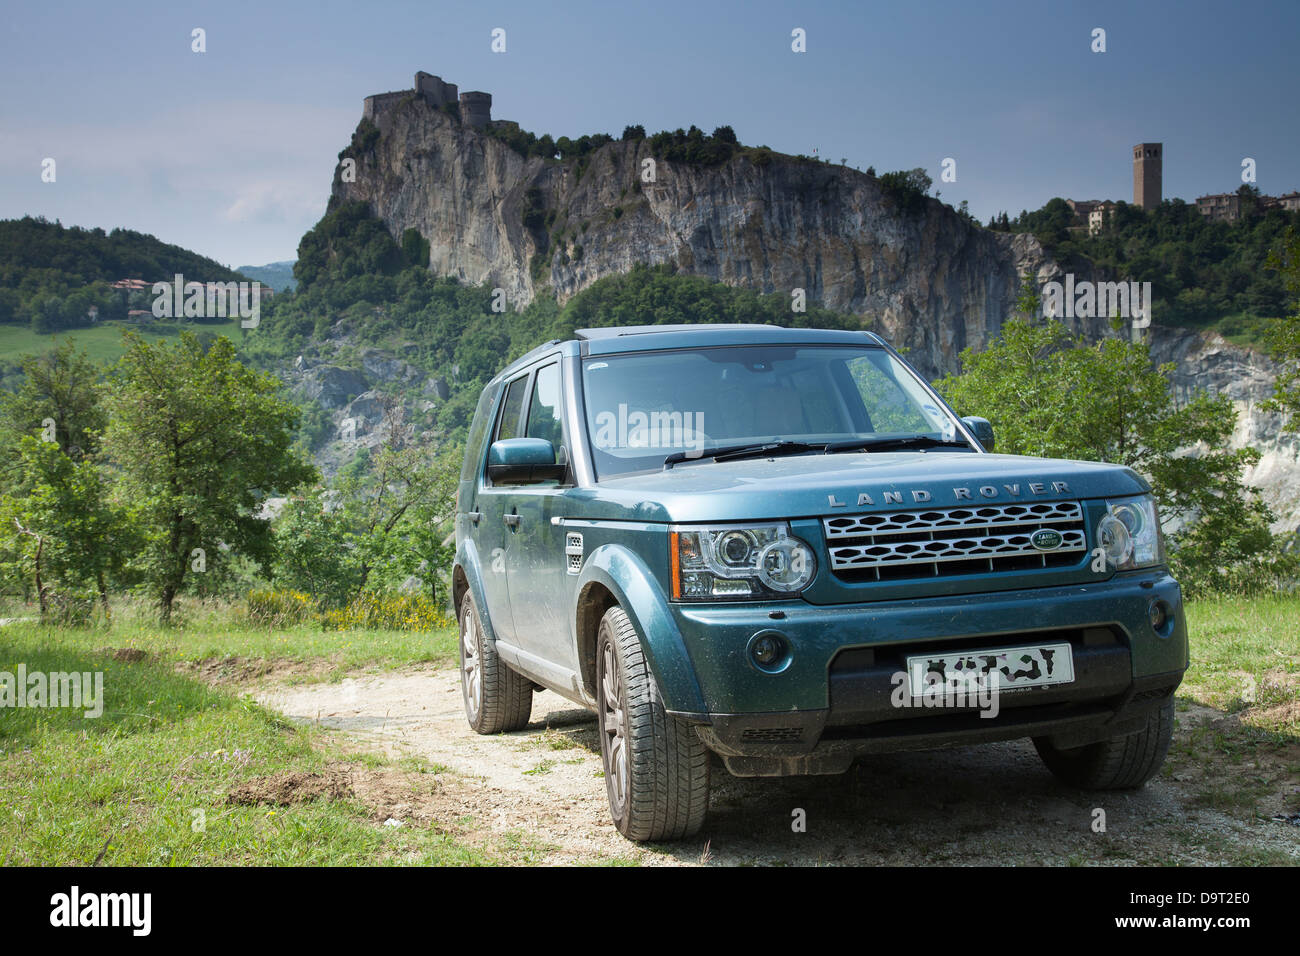 Land Rover, Marches, Italie Banque D'Images